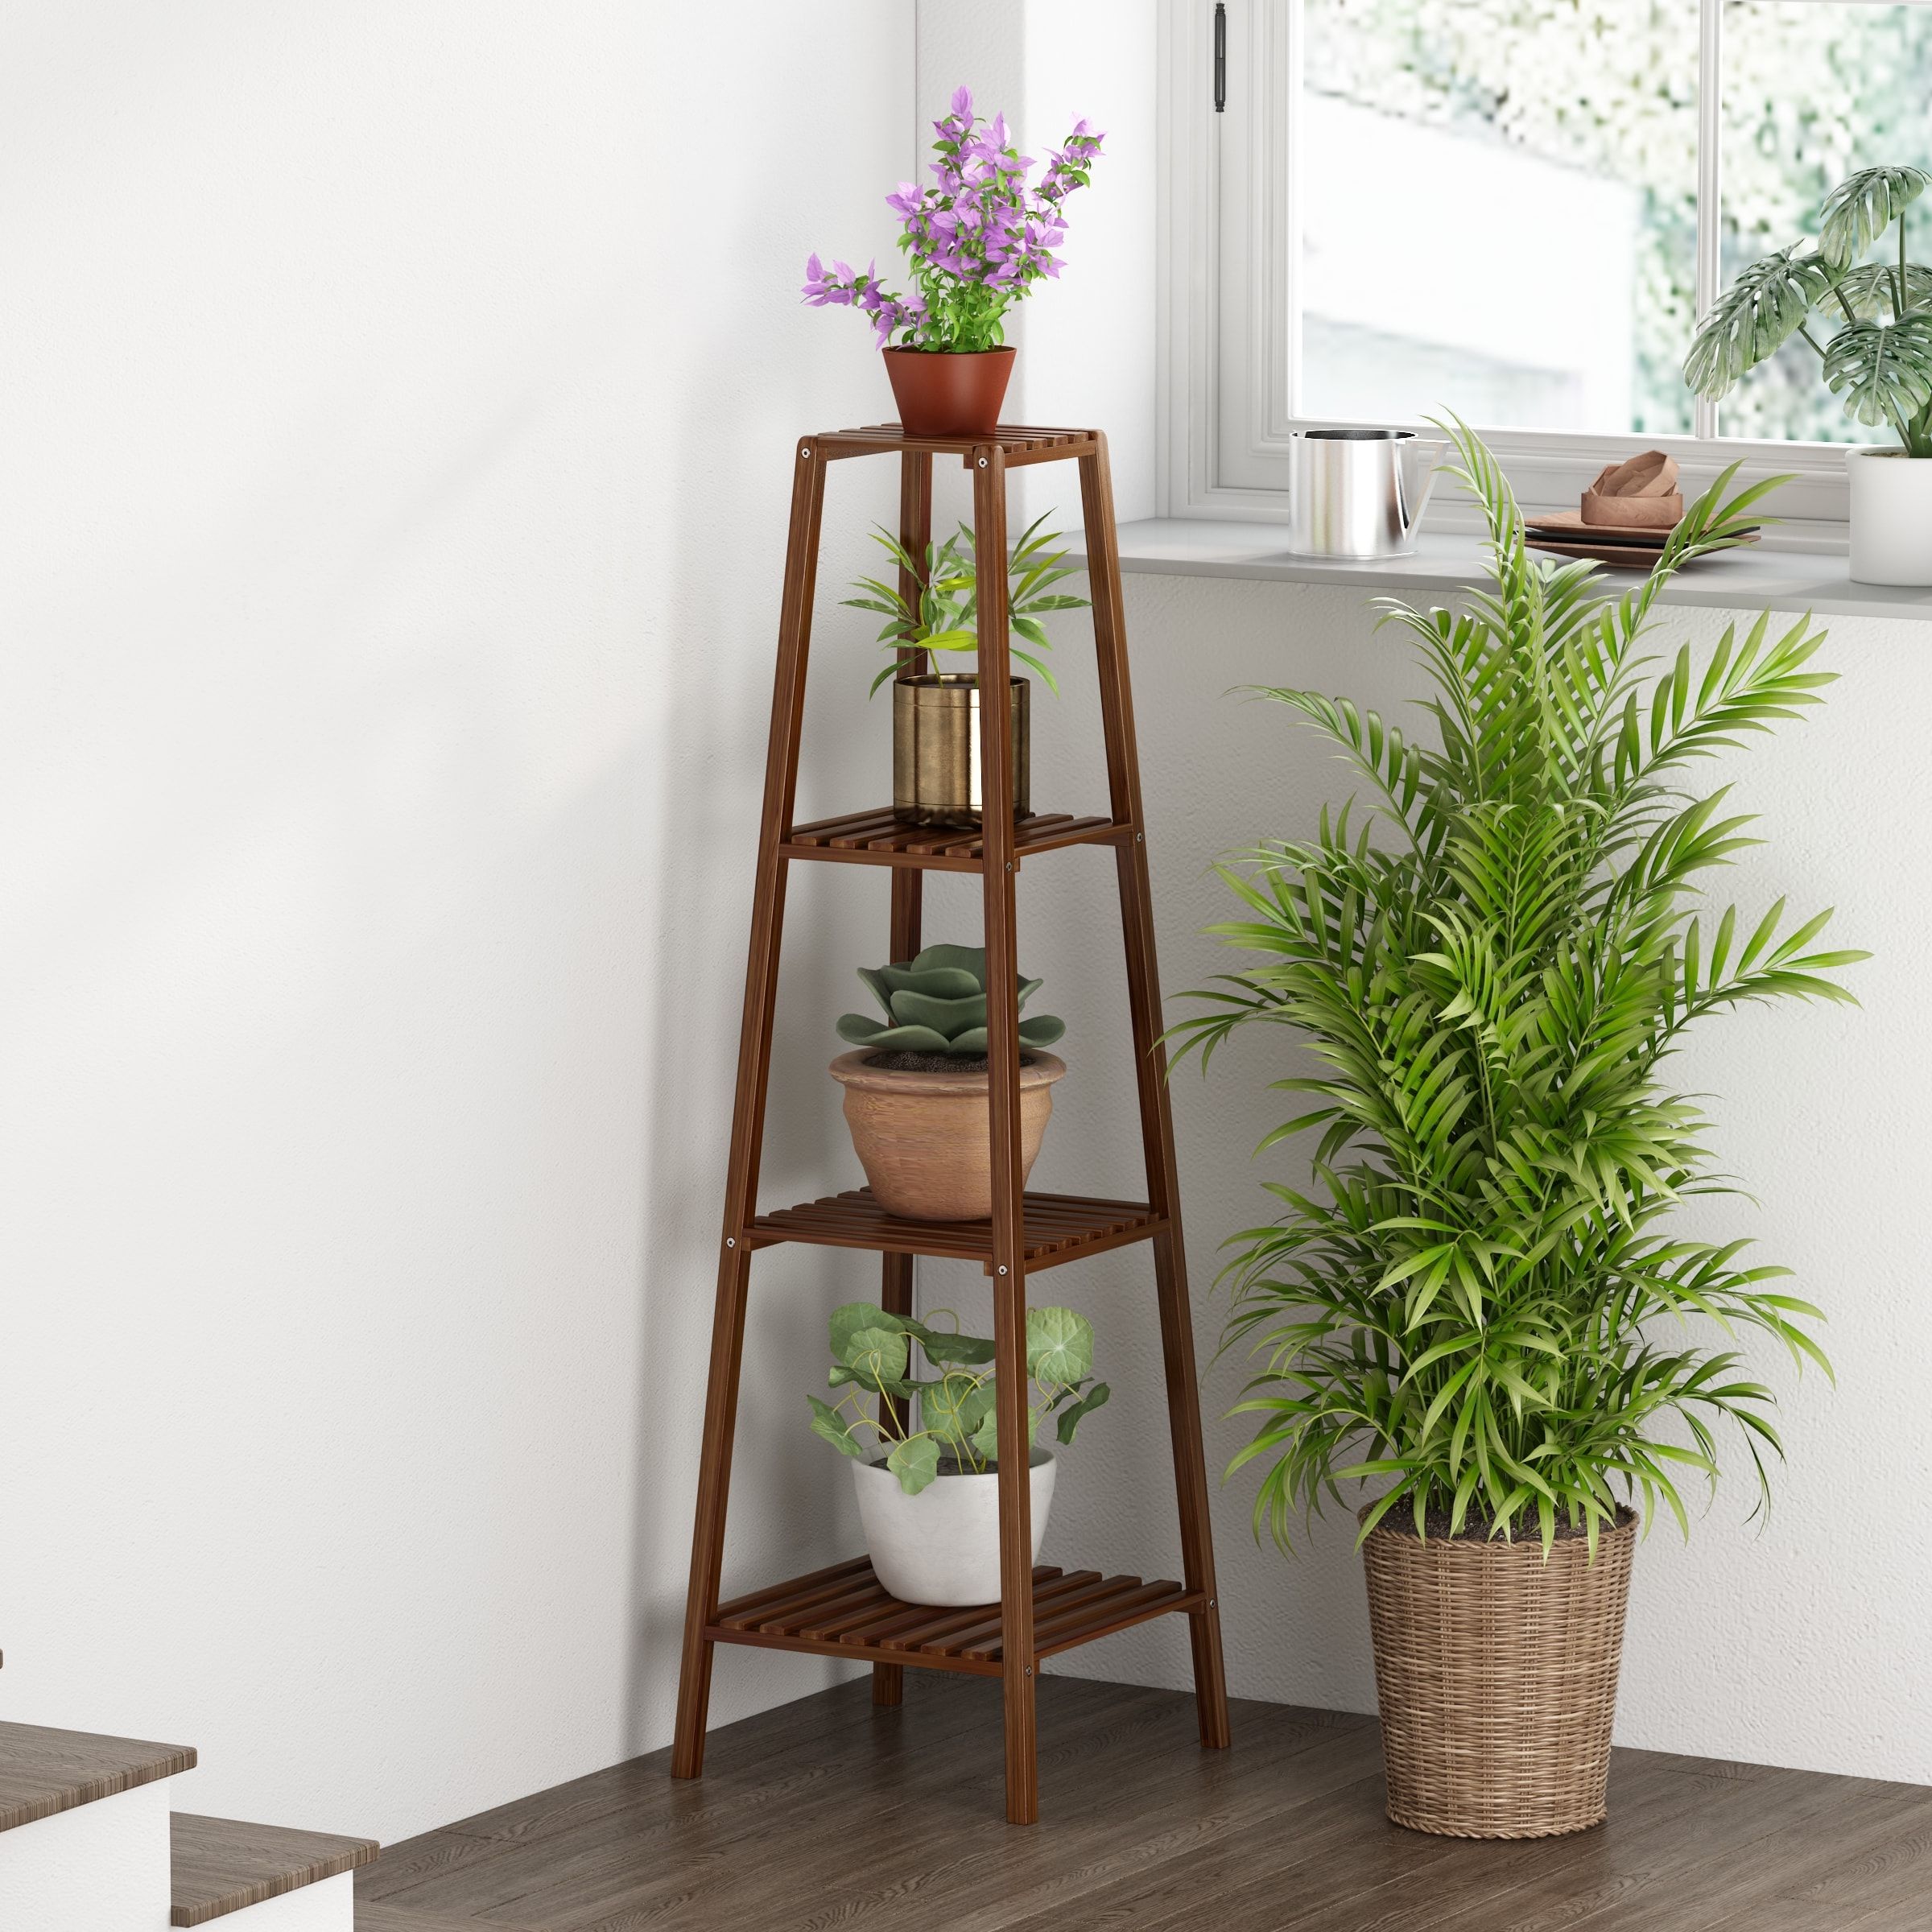 4 Tier Plant Stands Throughout Favorite Fufu&gaga 4 Tier Plant Stand 47.2 In H X  (View 1 of 15)